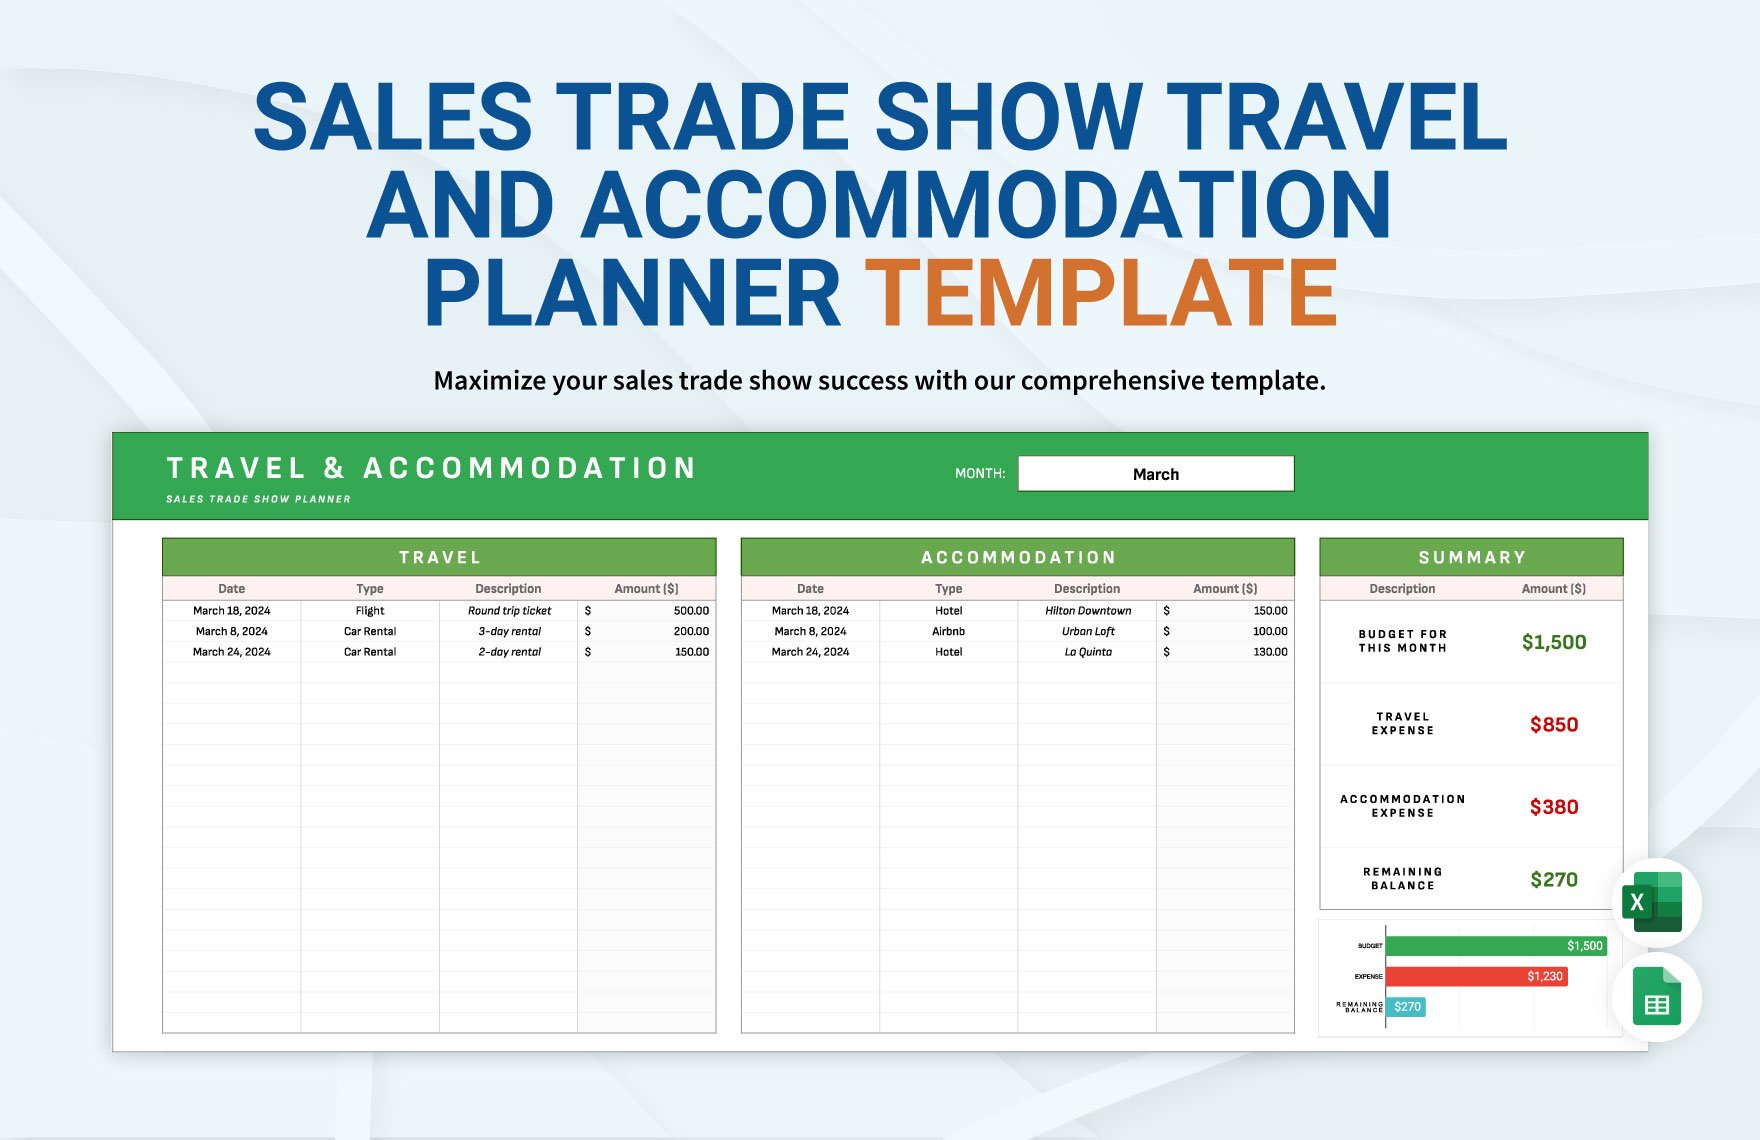 Sales Trade Show Travel and Accommodation Planner Template in Excel, Google Sheets